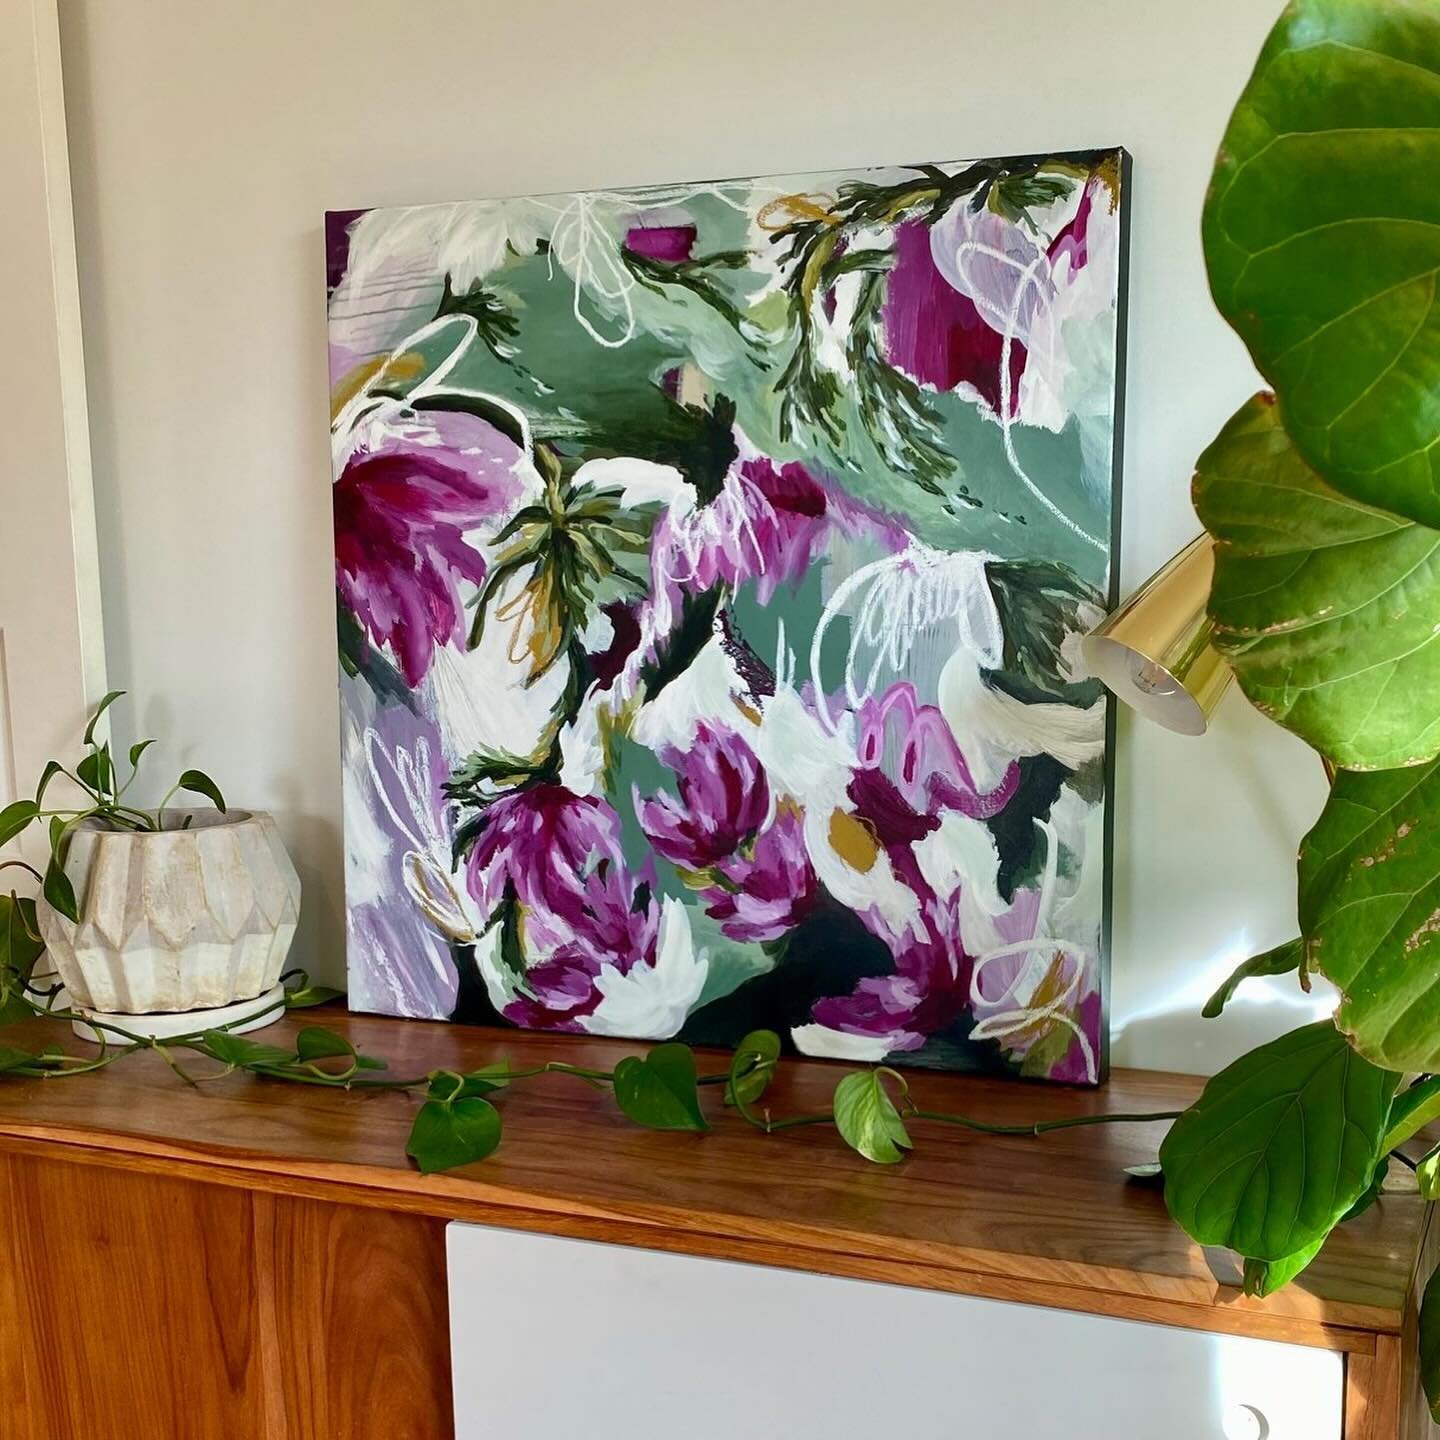 &lsquo;BLOOM&rsquo;- part of my Flourish series is ON SALE NOW with free shipping Australia wide! 🌸 

#melbourneartist #abstractart #melbourne #botanicalart #botanicalpainting #interiordesign #interiordecorating #melbourneart #originalart #australia